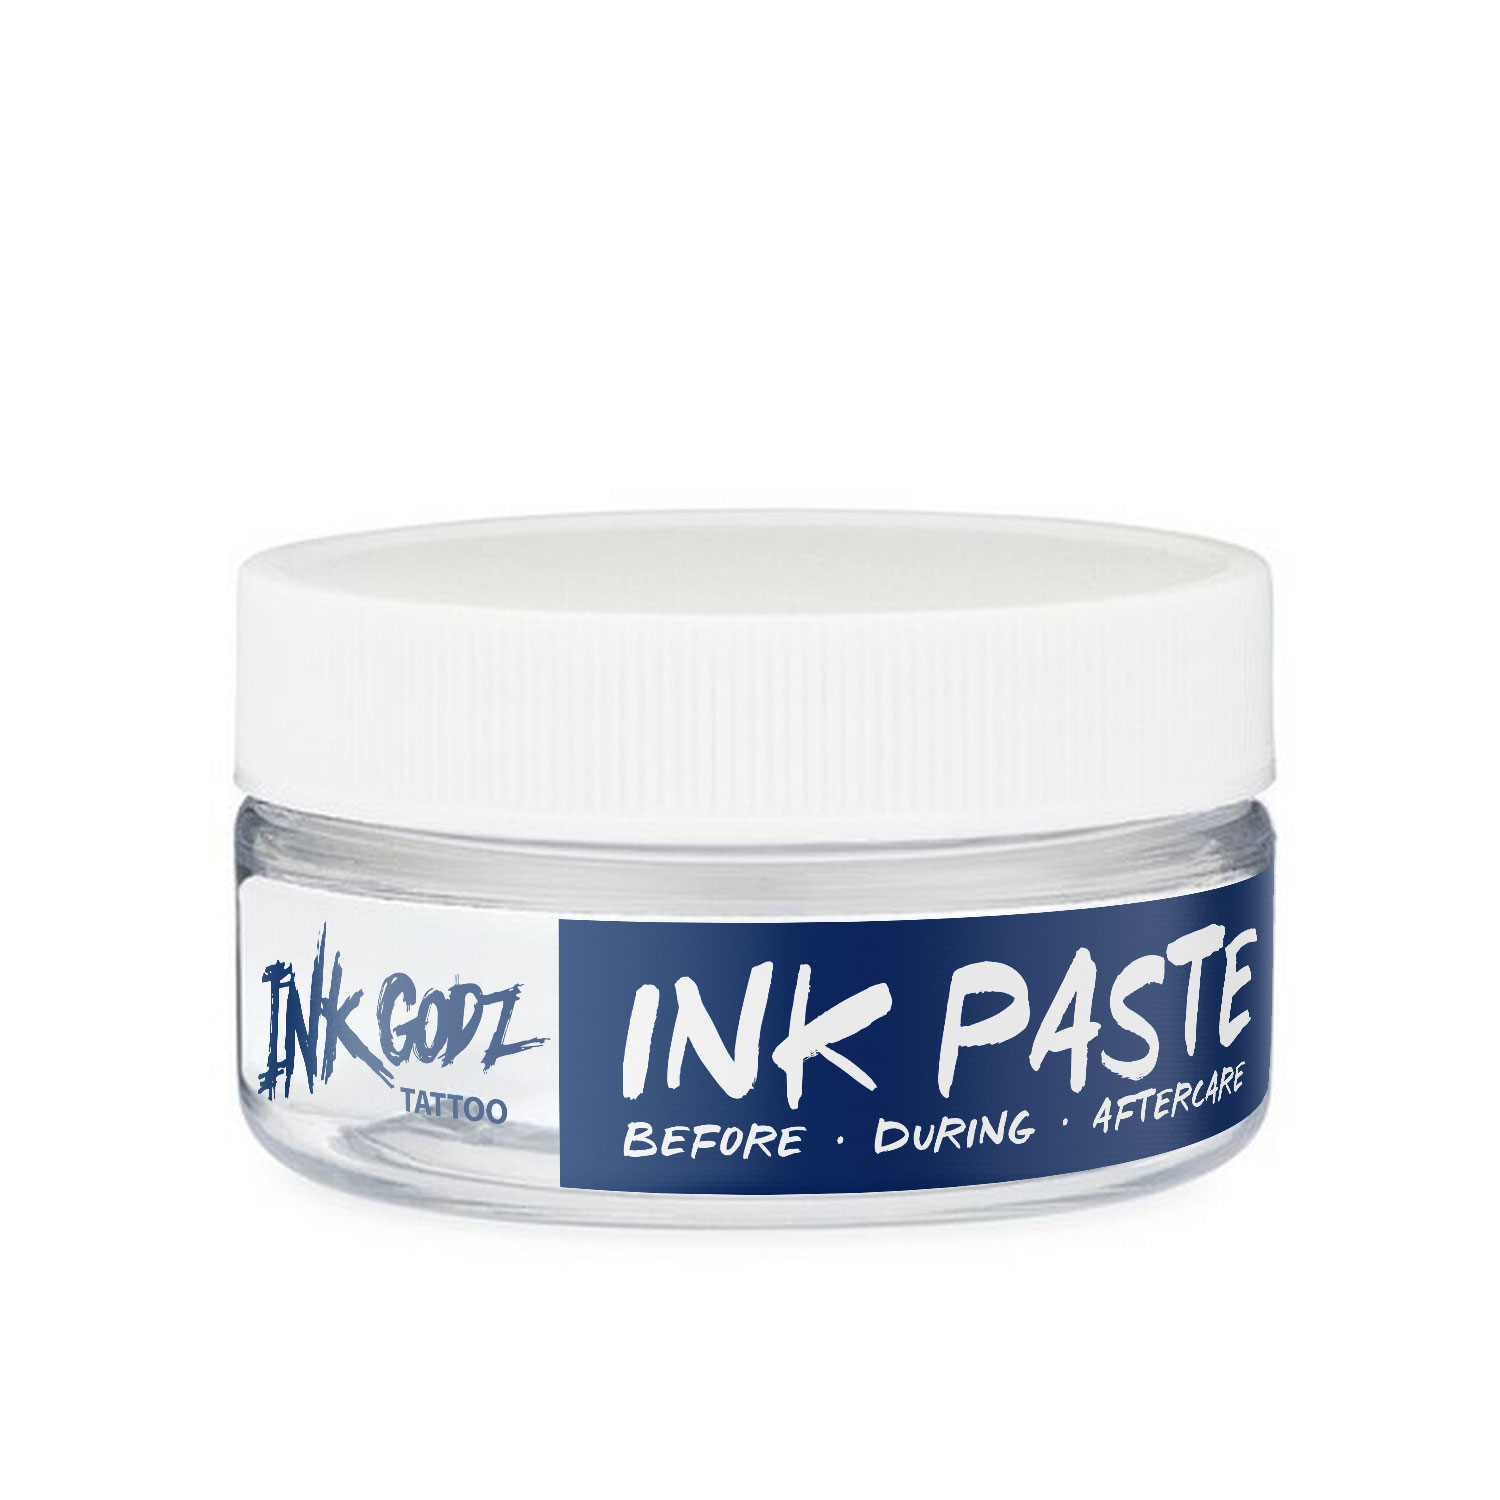 Ink Paste Tattoo Aftercare image